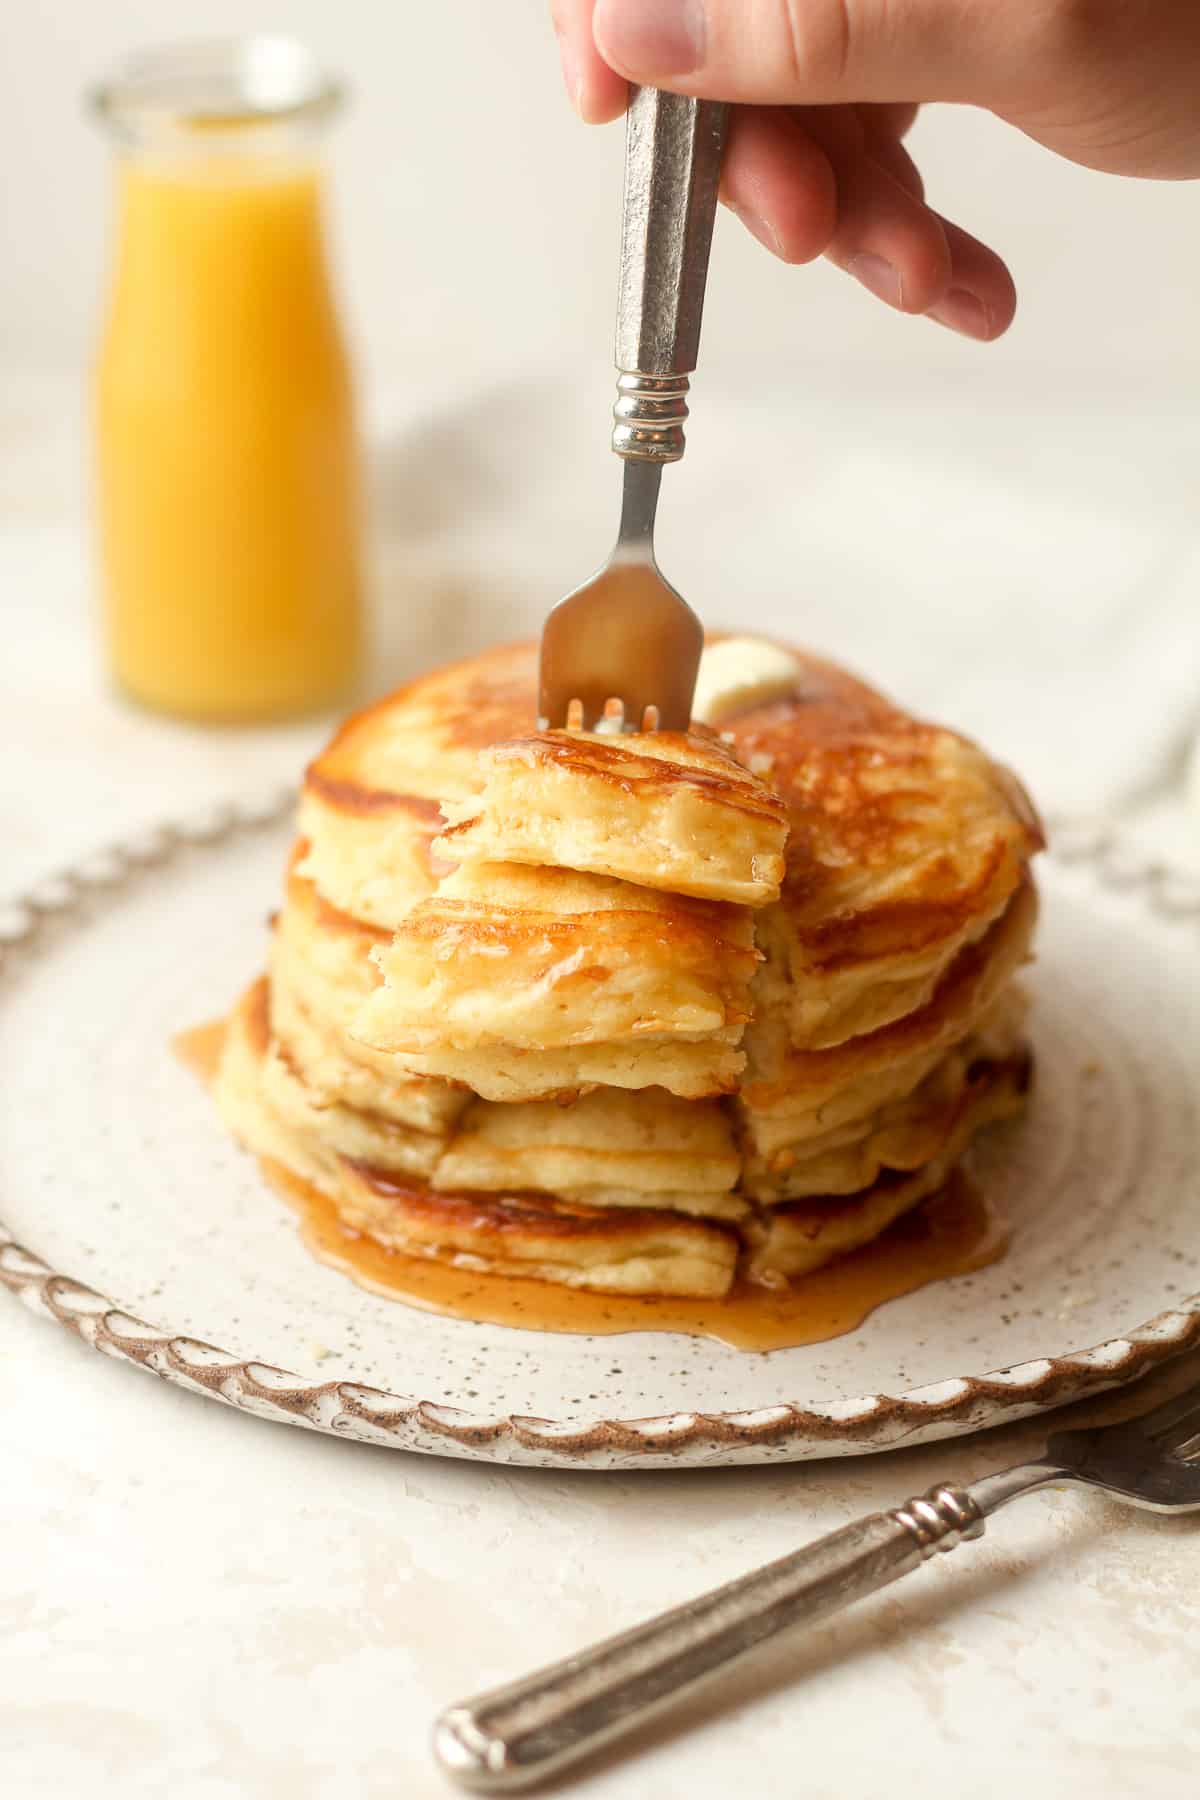 A hand sticking a fork in a stack of pancakes.